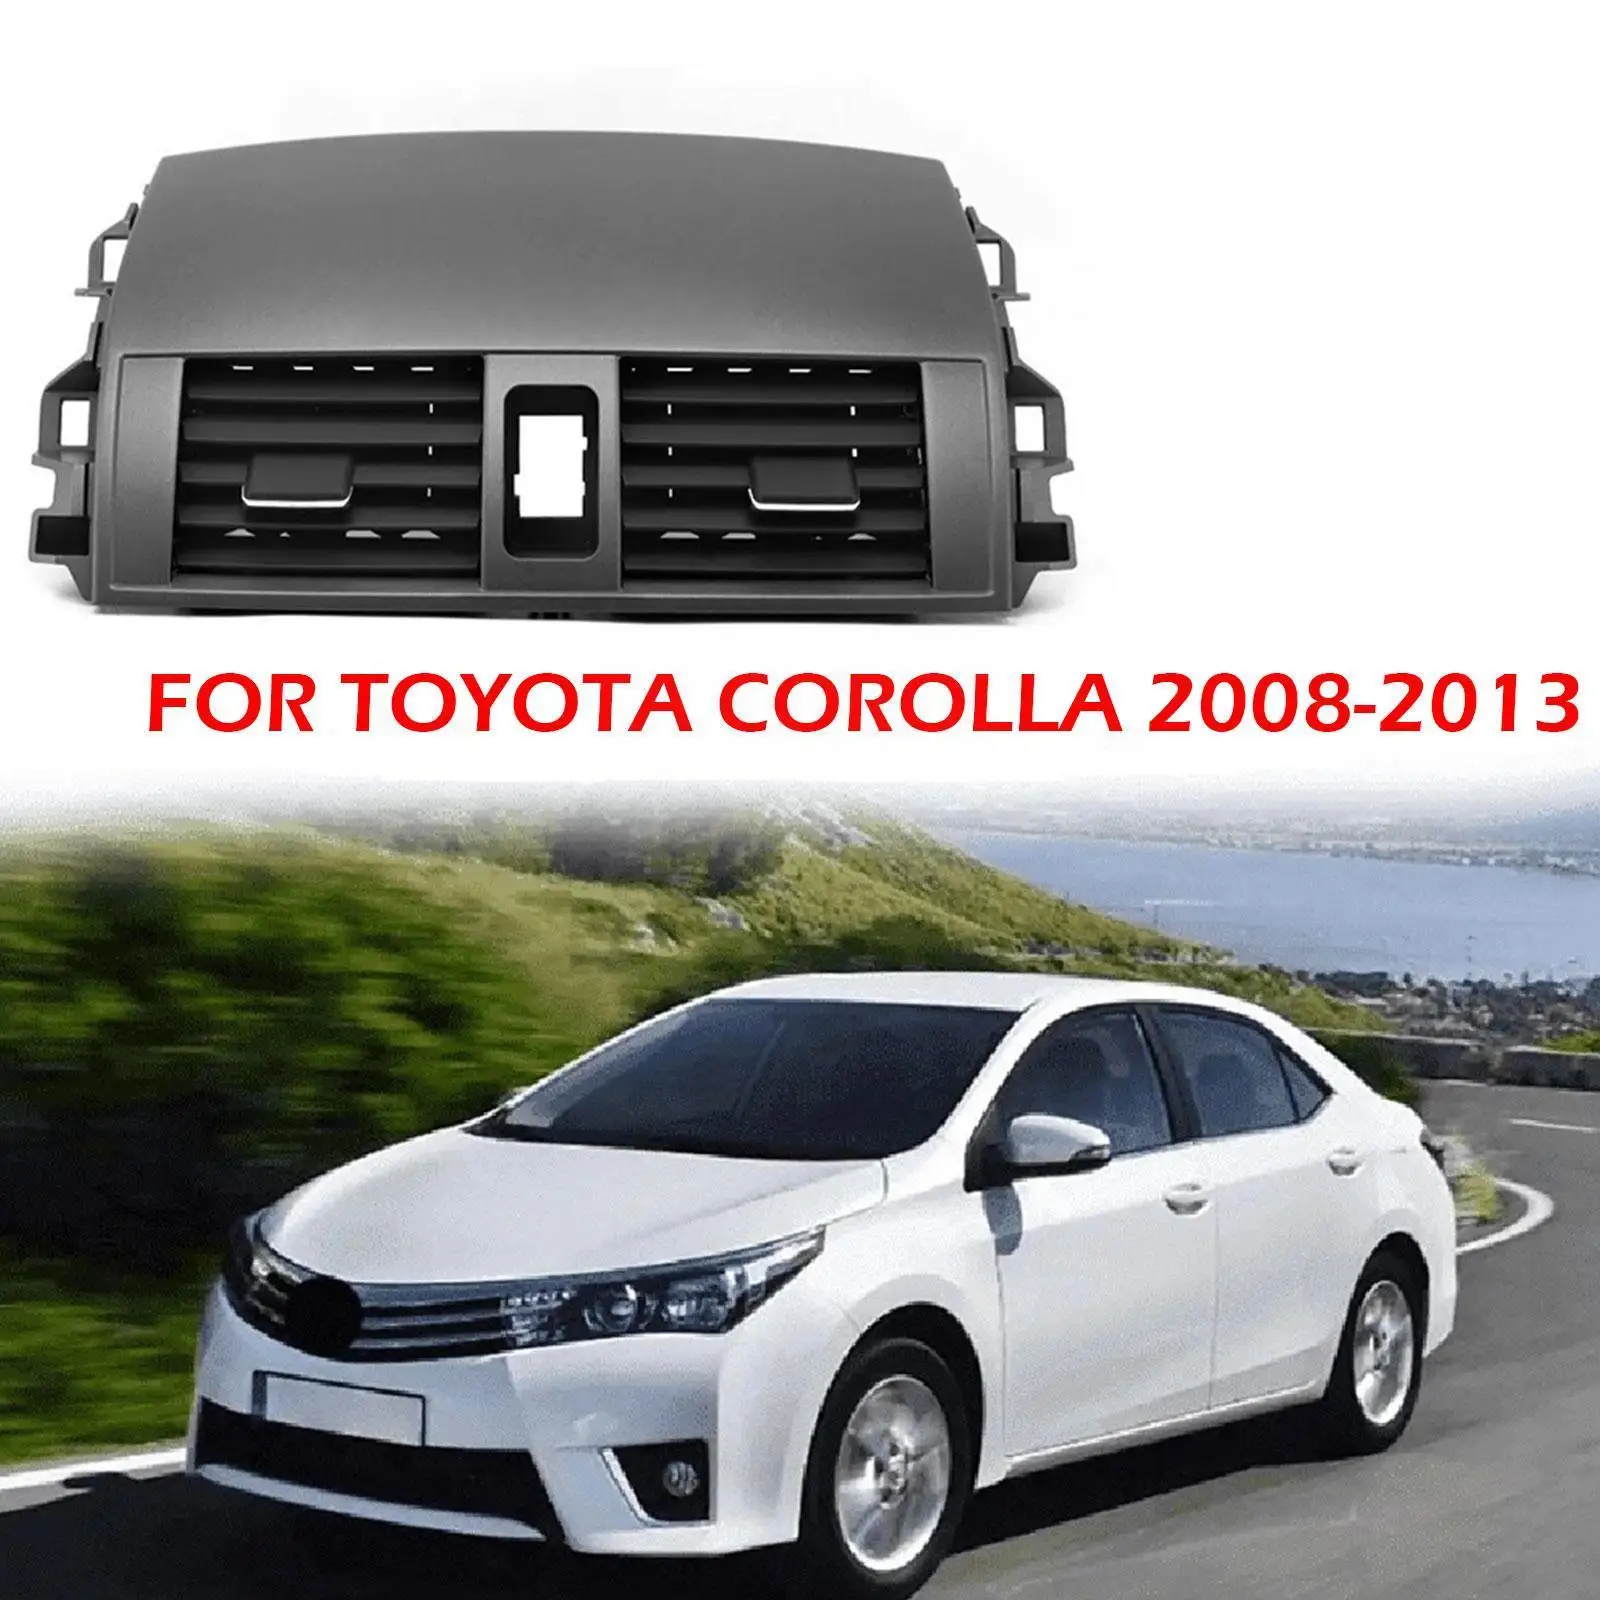 

Center Dash A/C Outlet Air Vent Panel for Toyota Corolla 2008-2011 2012 2013 Air Conditioner Car B8X2